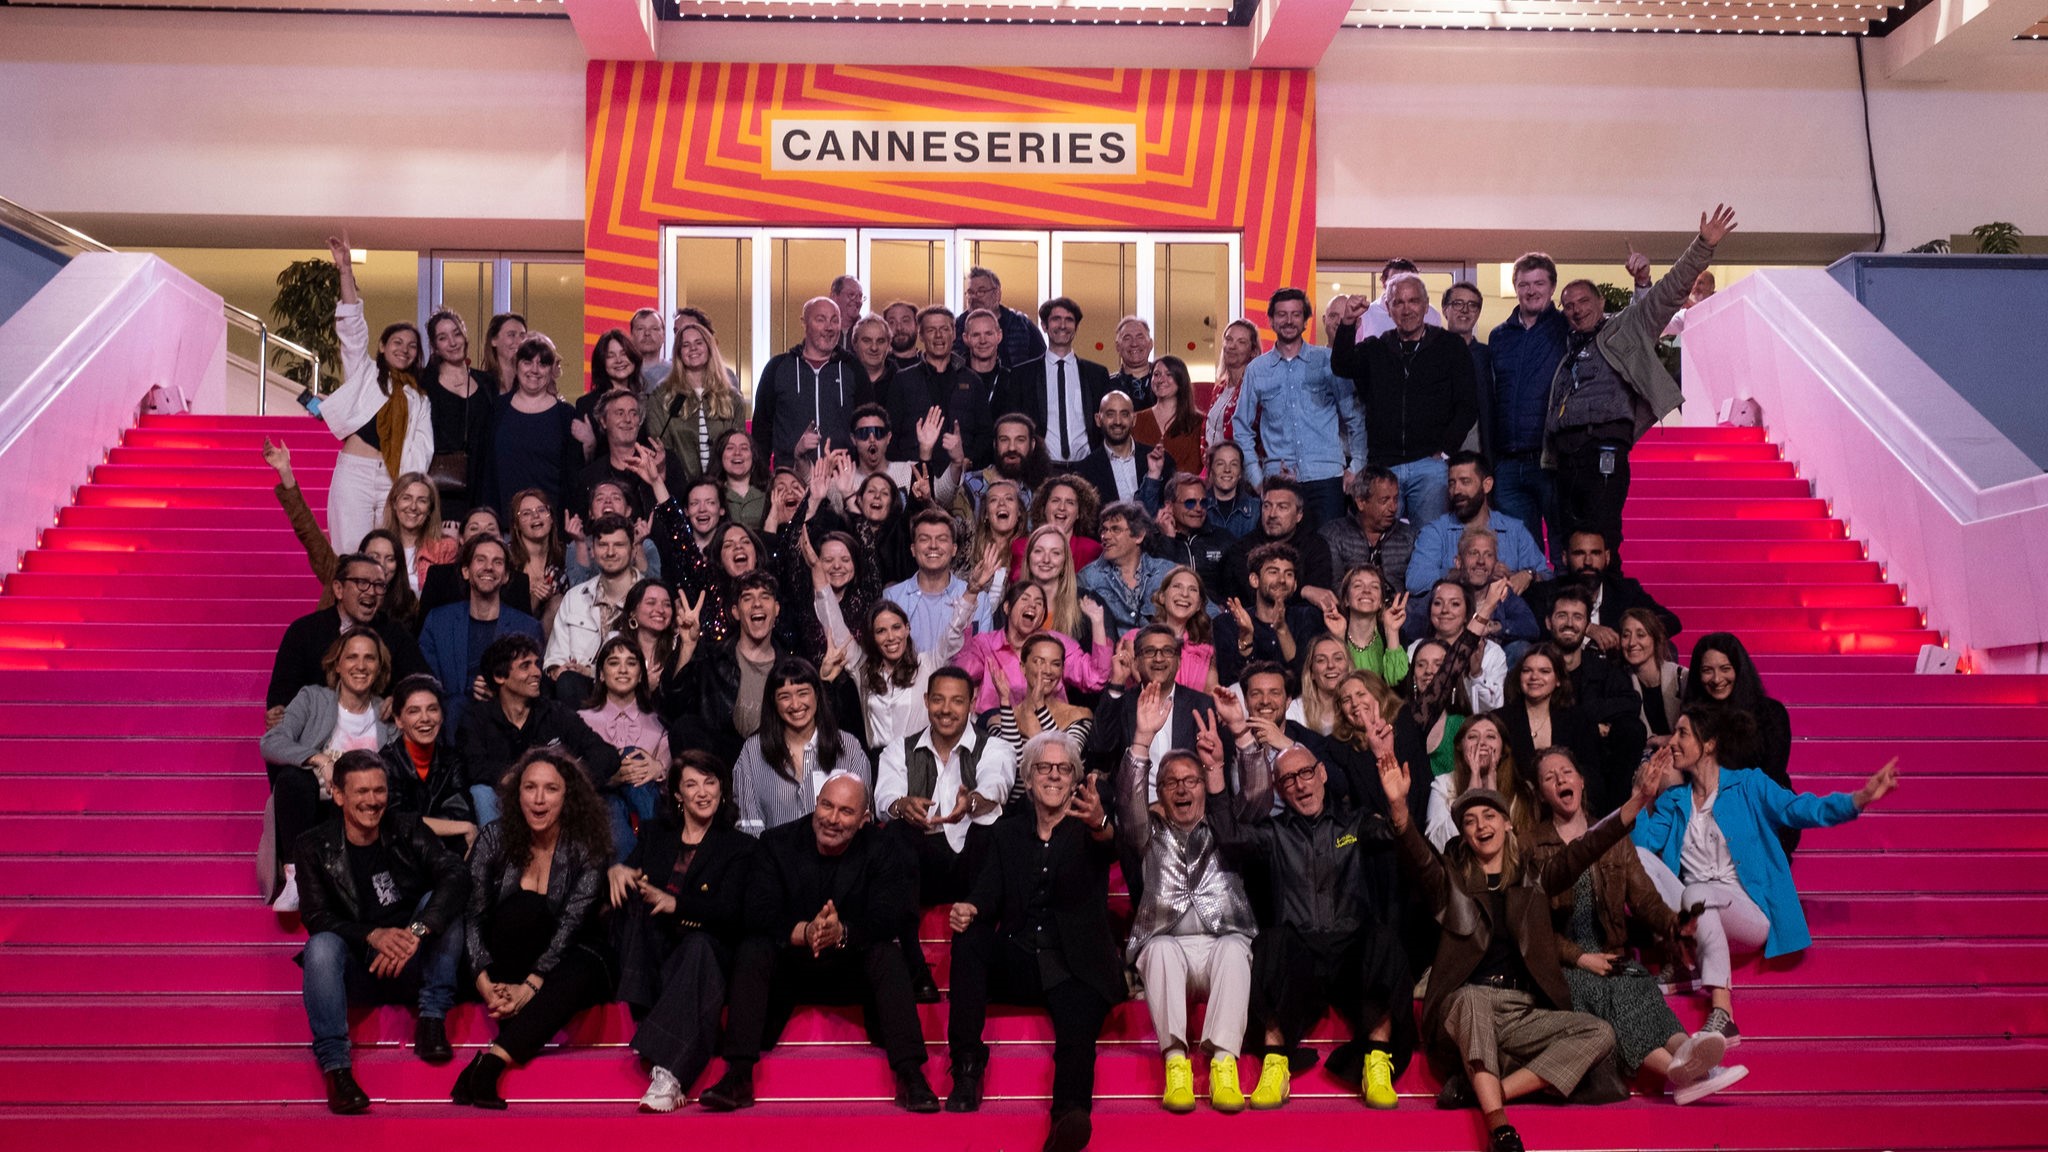 CANNESERIES  About the Festival